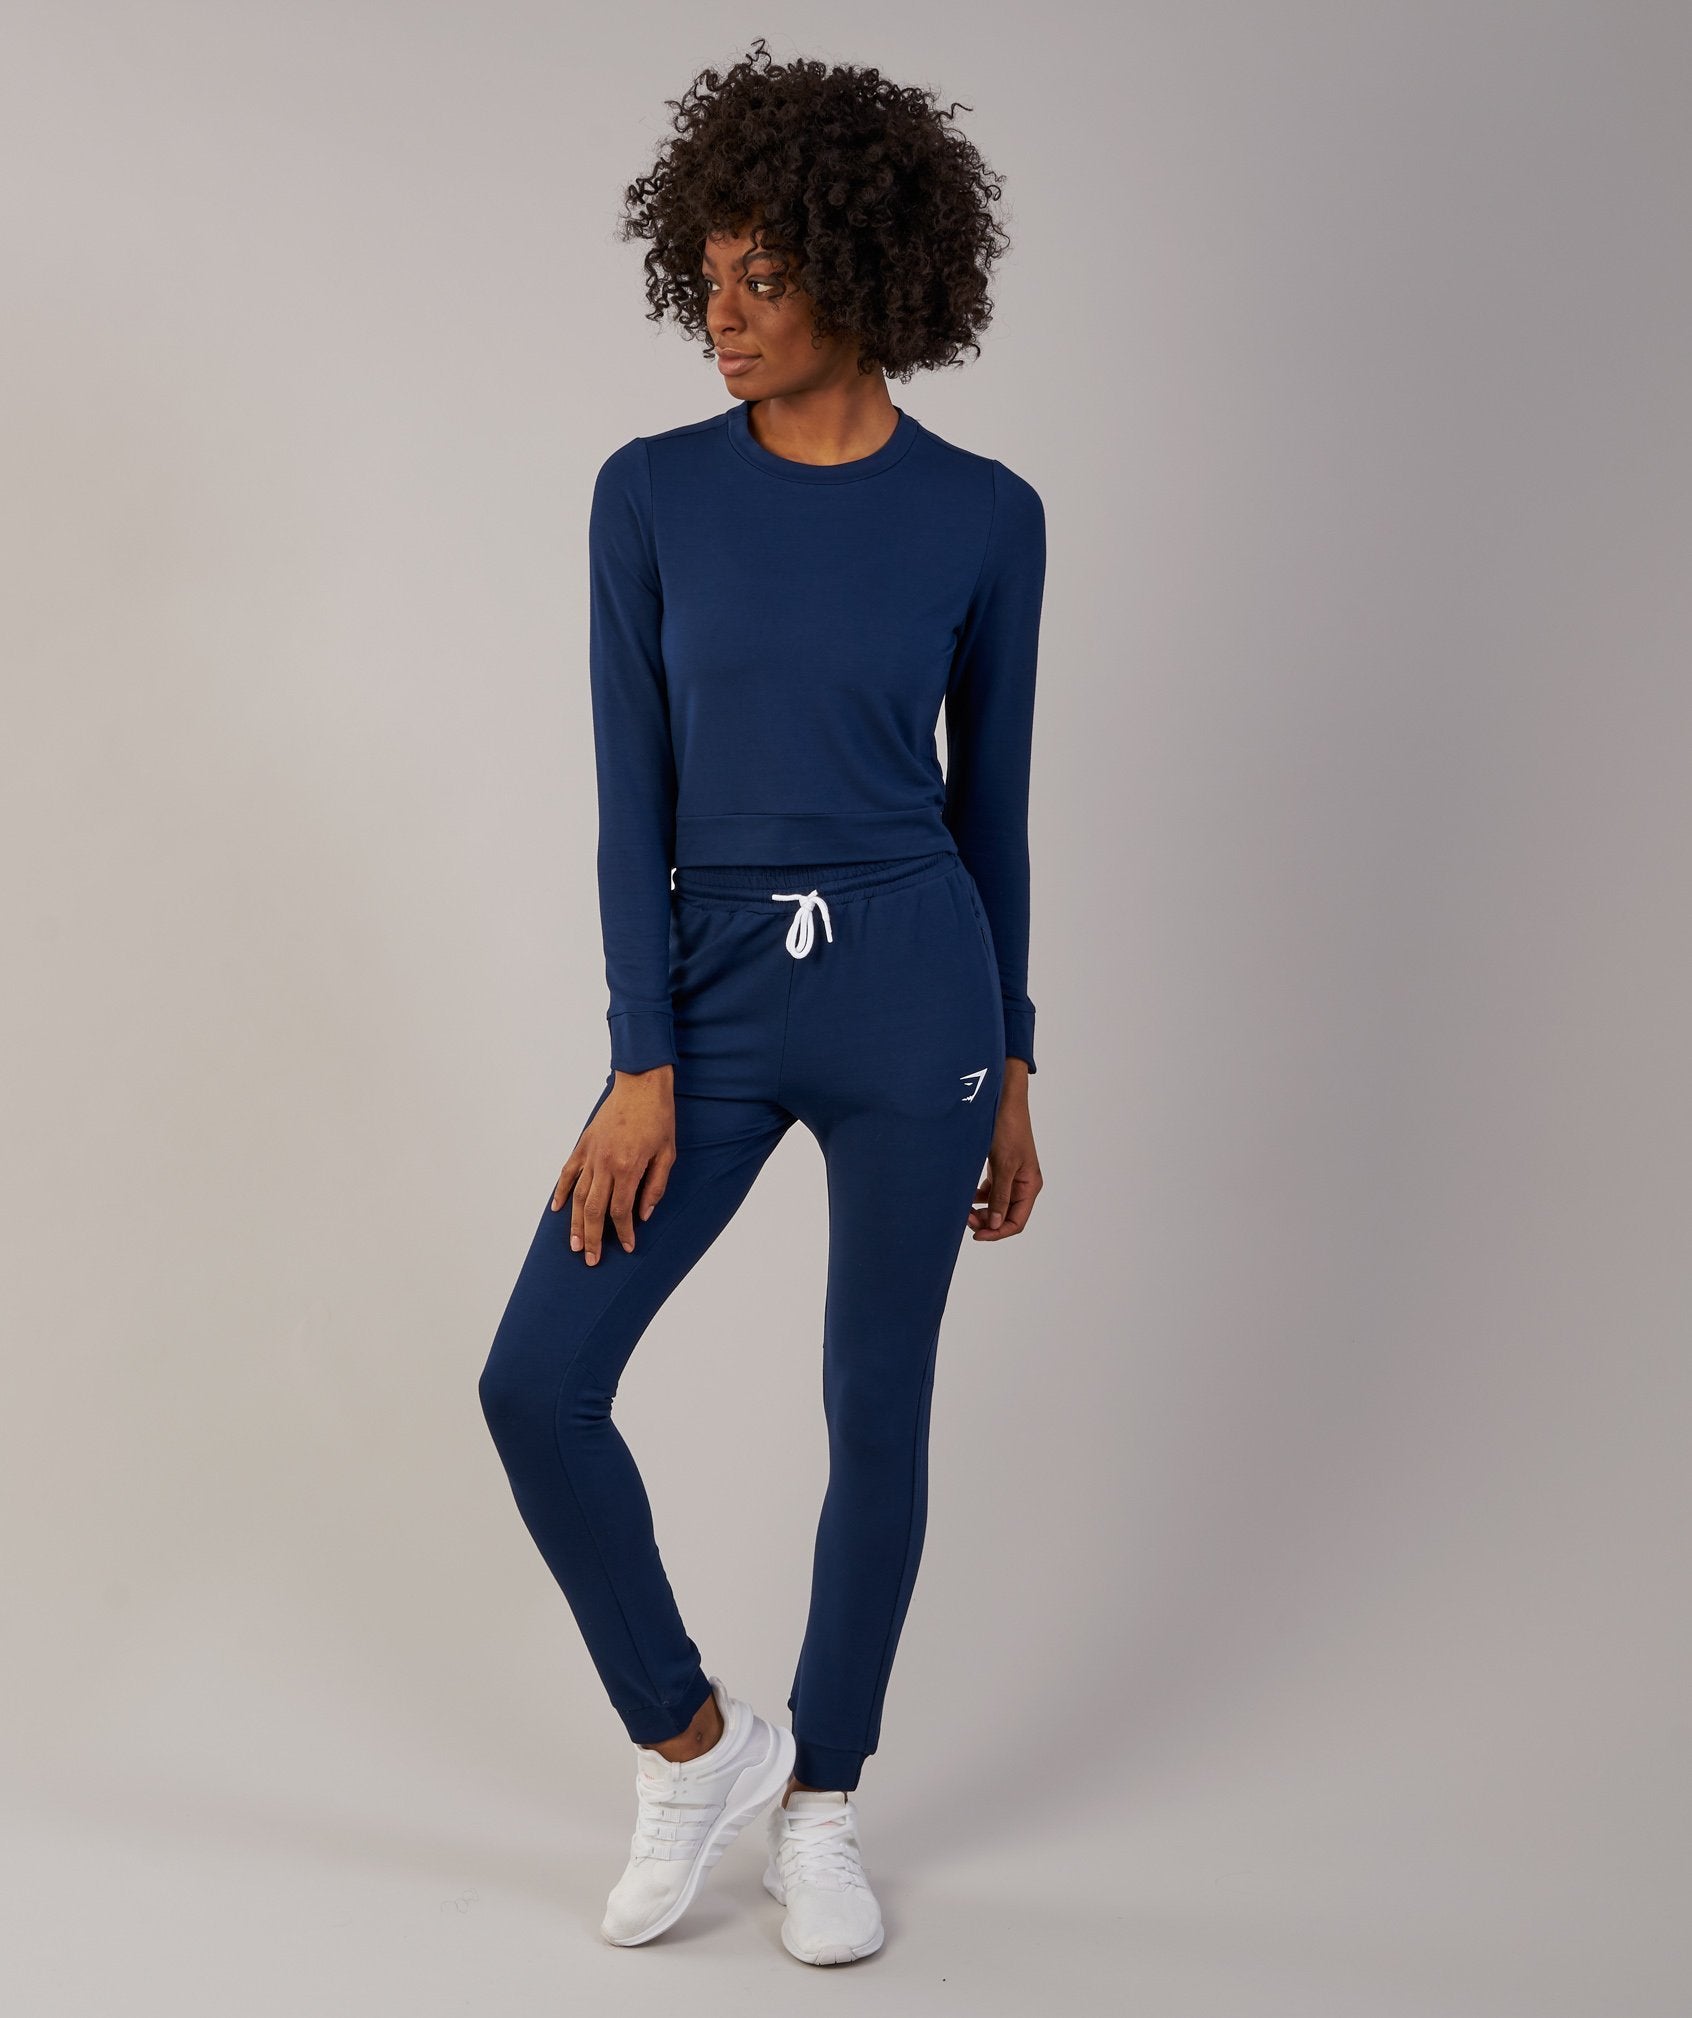 Solace Bottoms in Sapphire Blue Marl - view 3